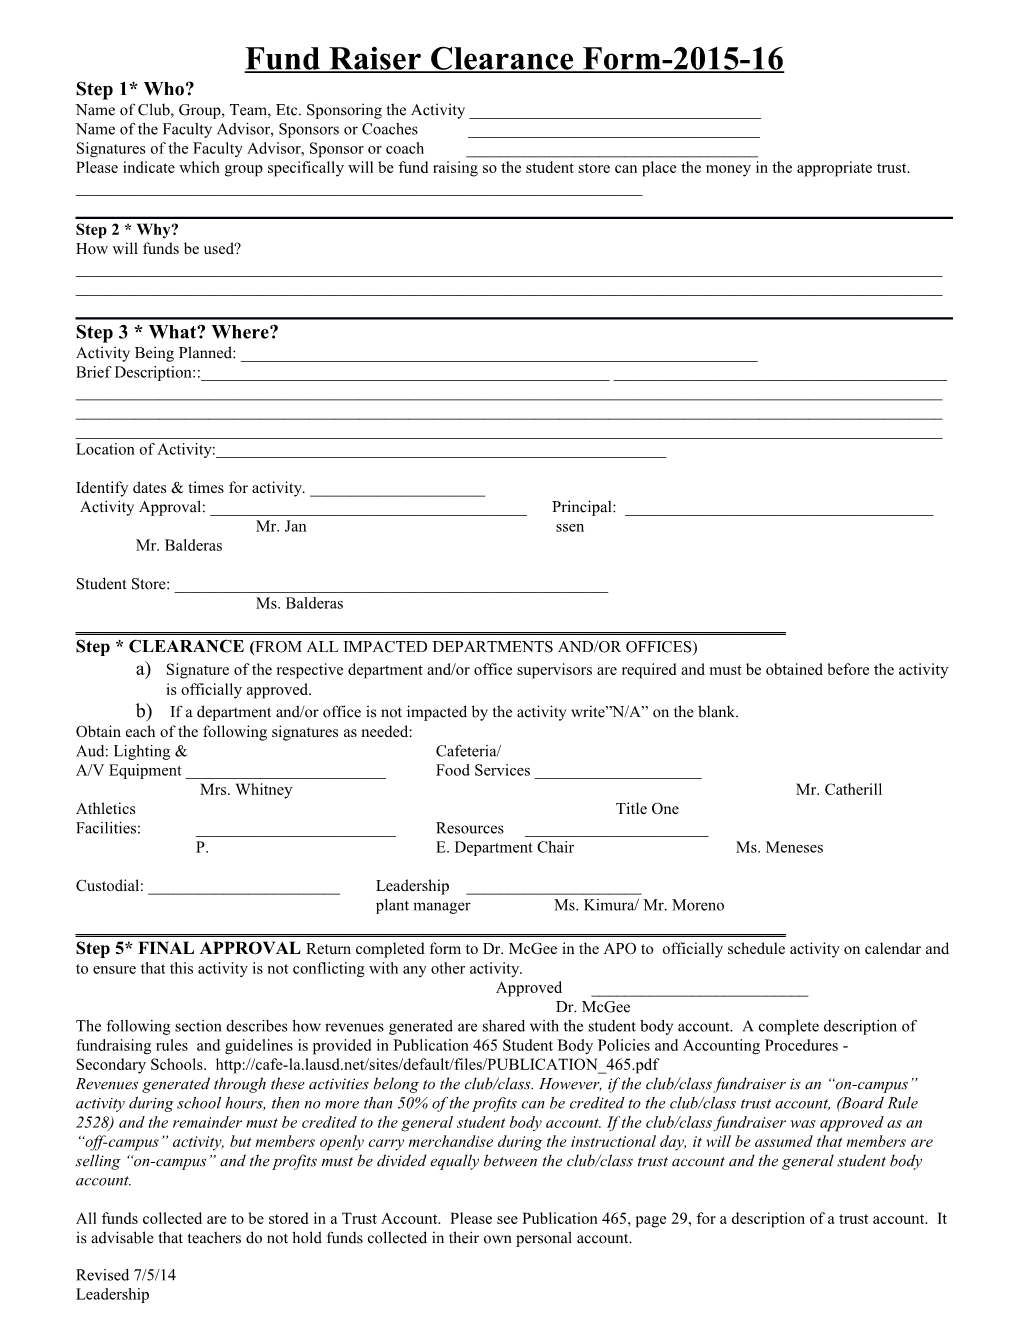 Bell High Activity Clearance Form